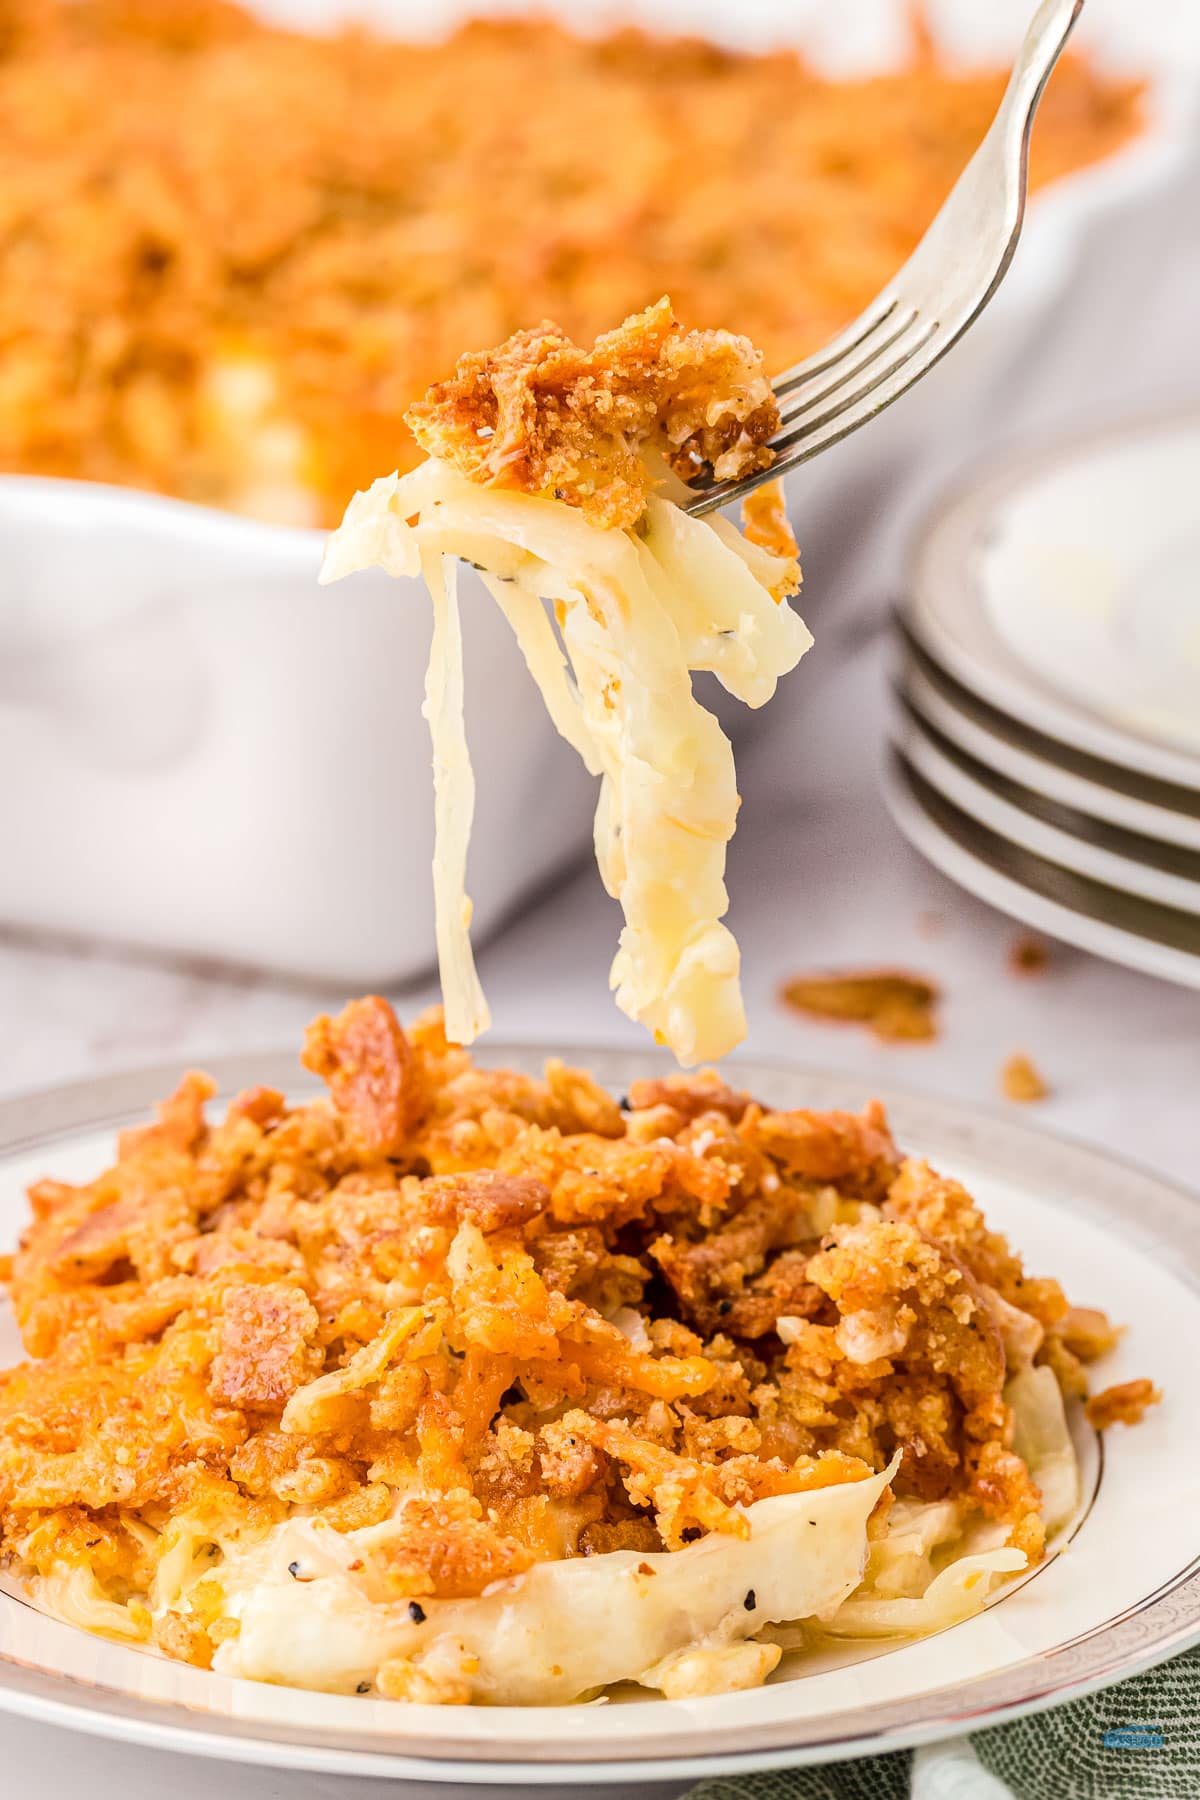 A forkful of cabbage casserole